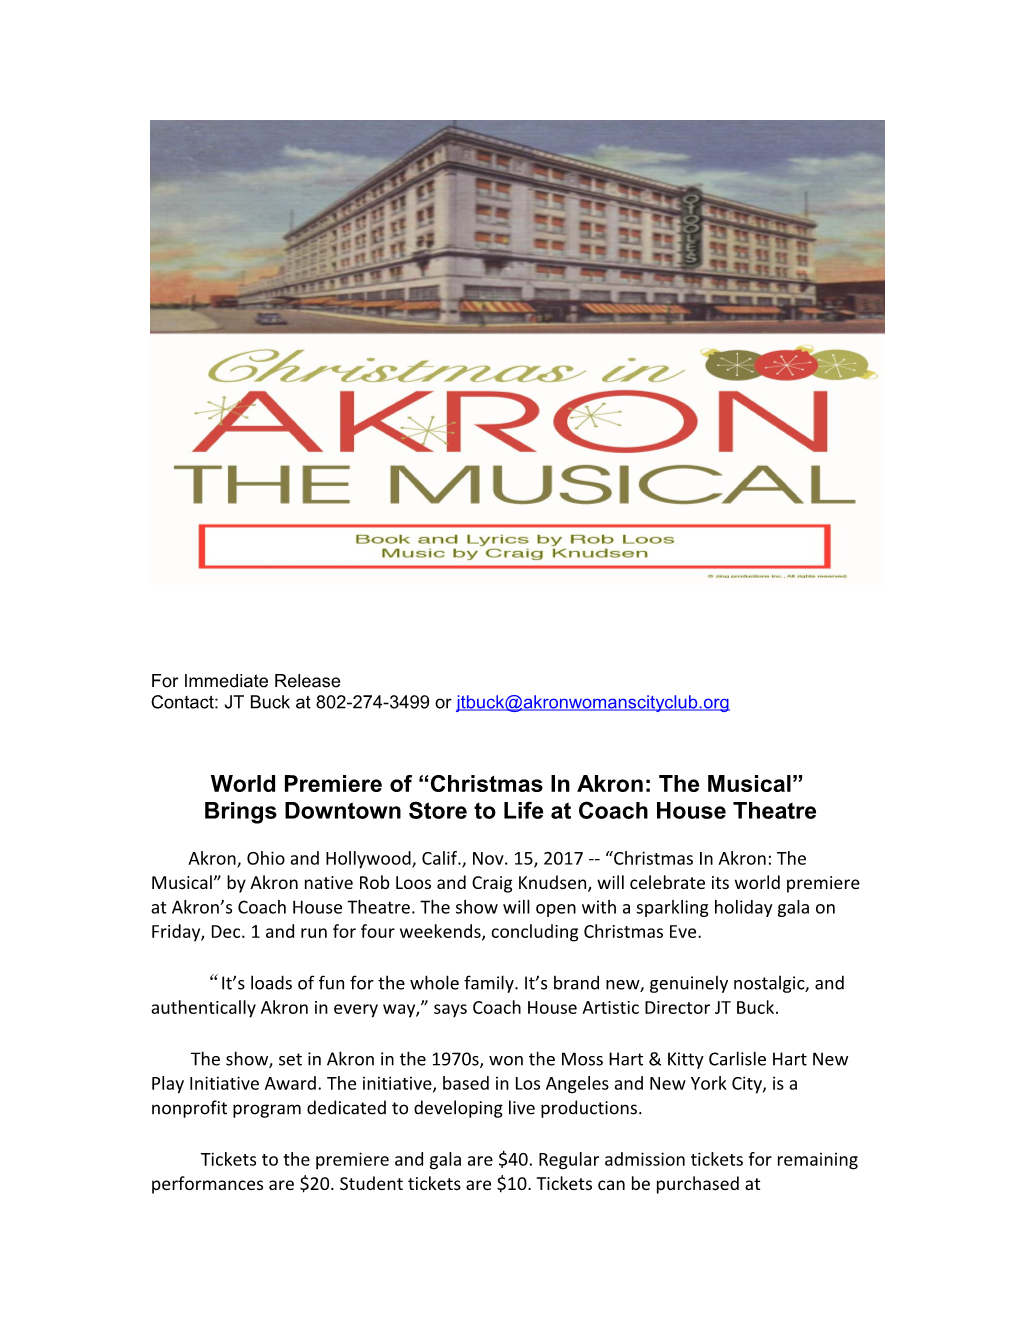 World Premiere of Christmas in Akron: the Musical